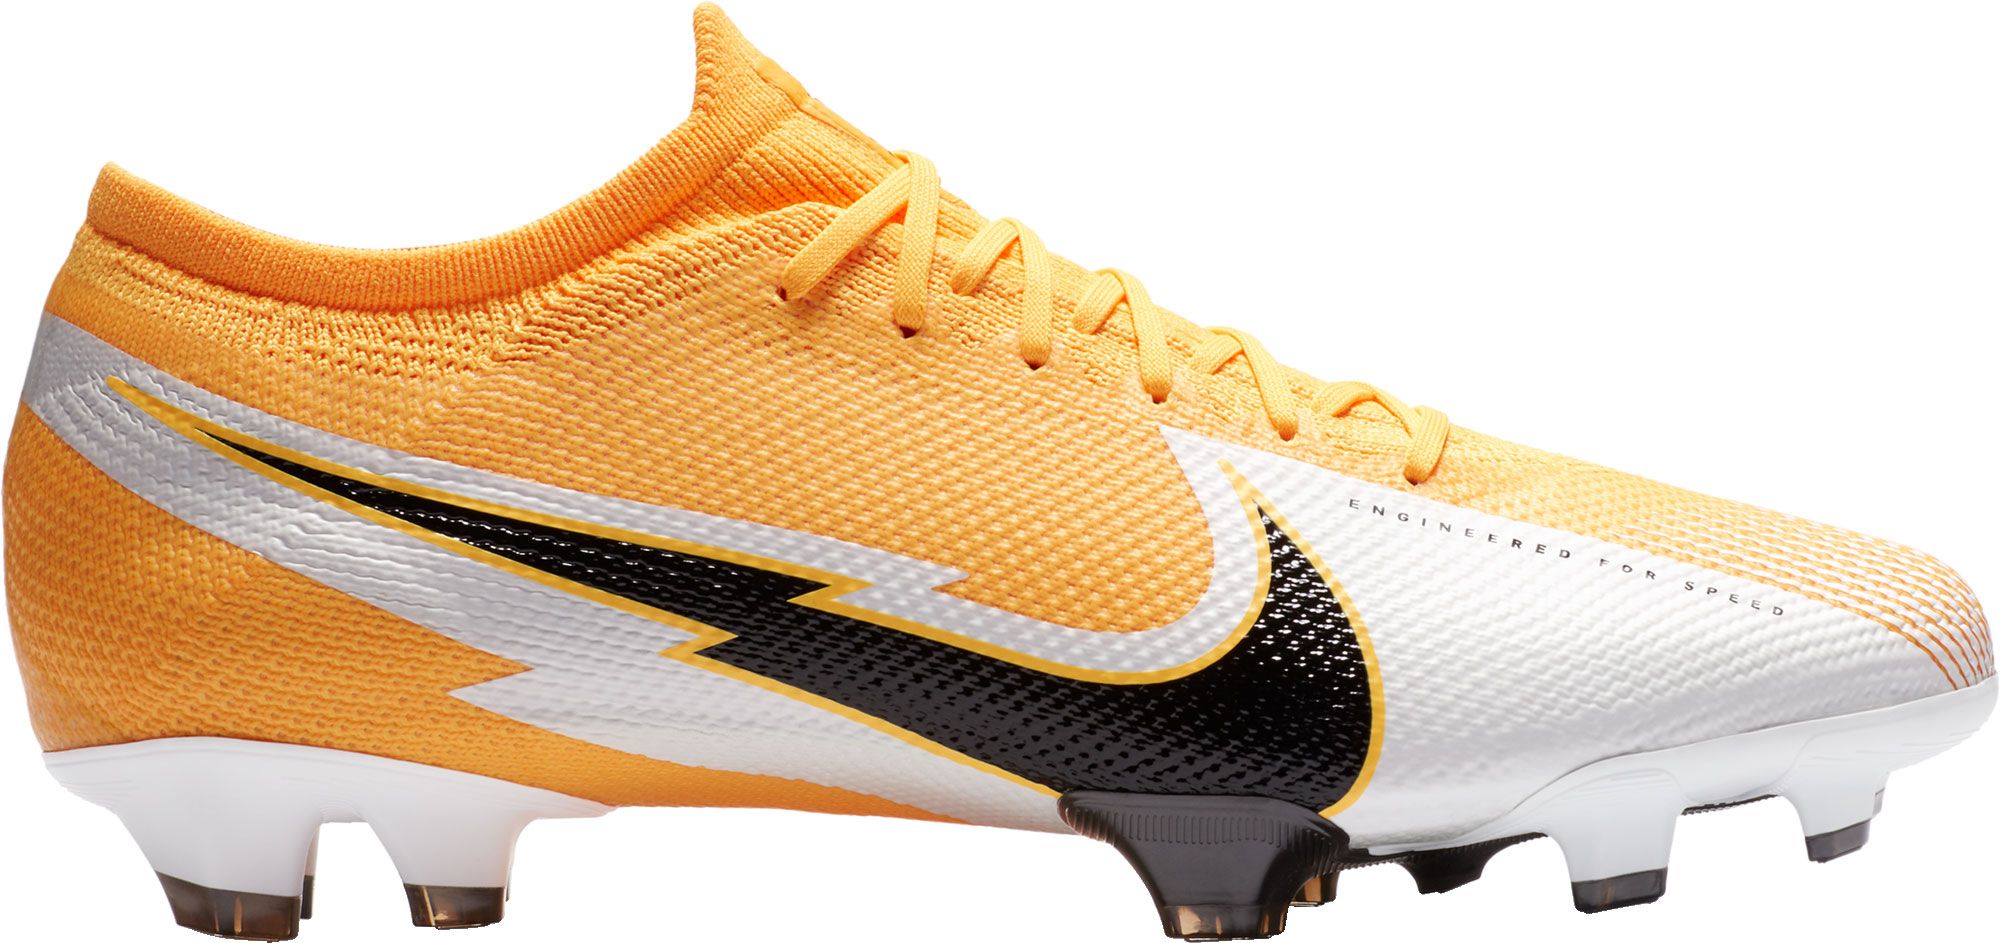 yellow soccer cleats